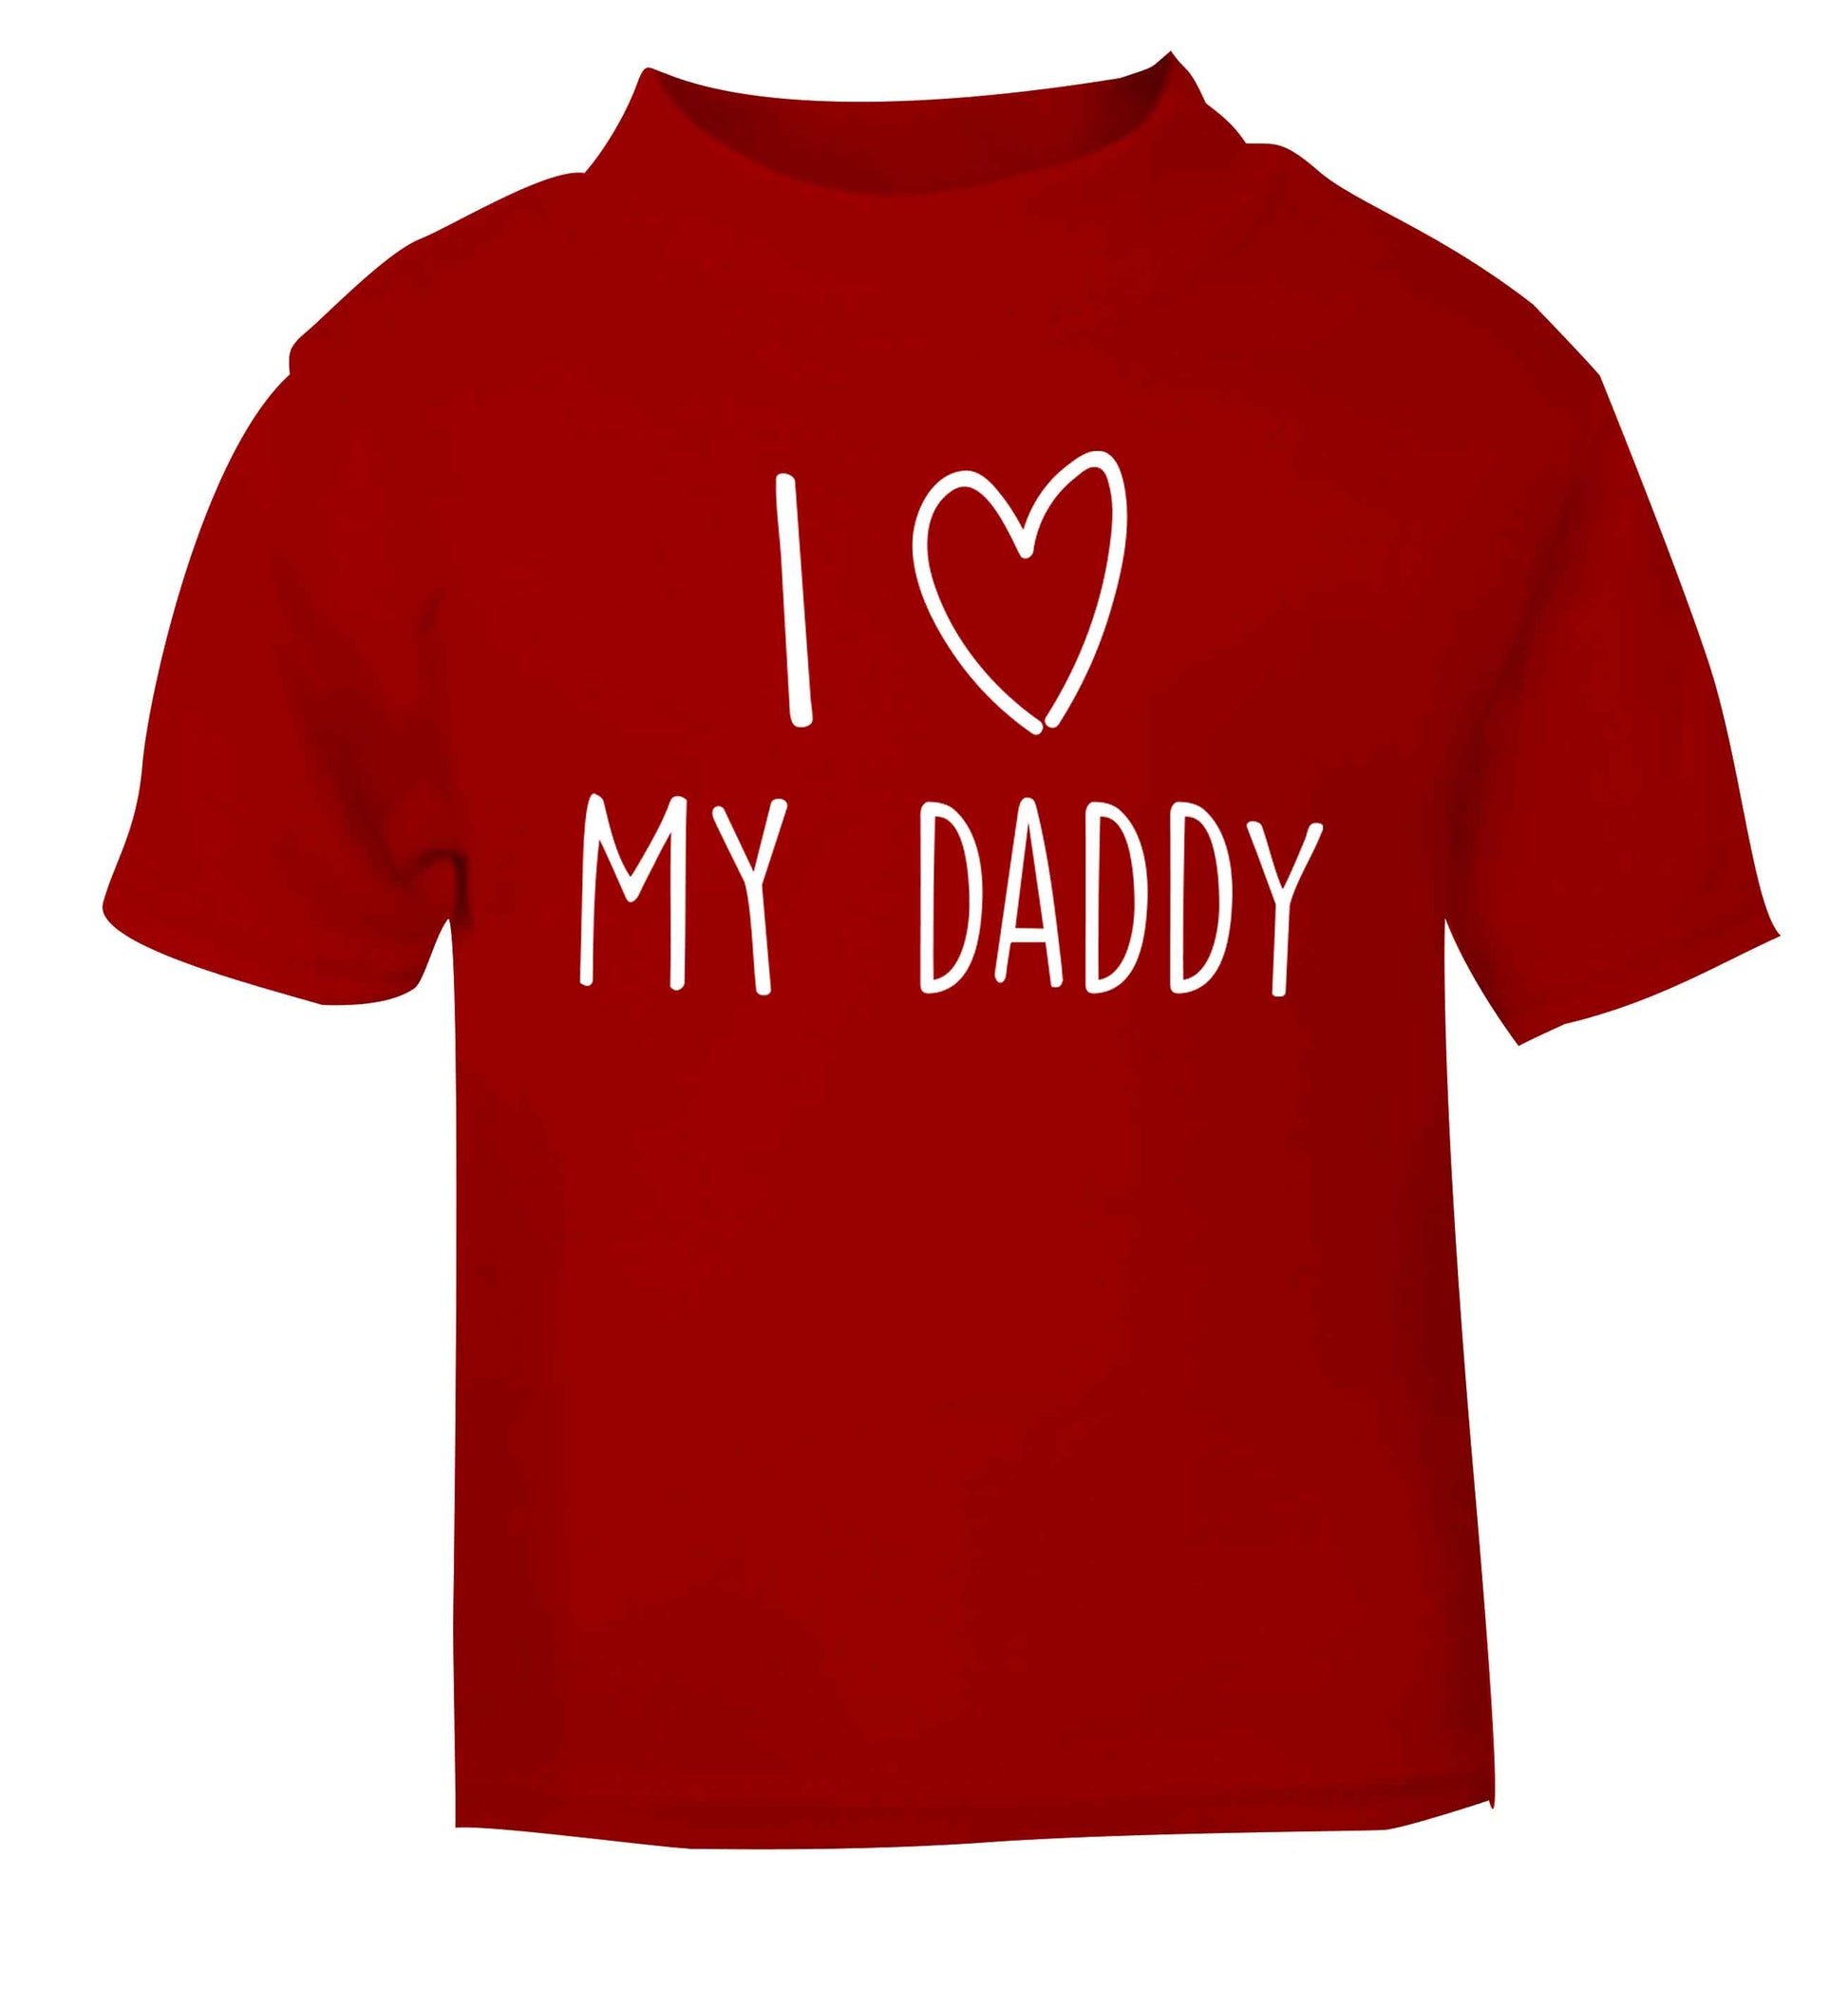 I love my daddy red baby toddler Tshirt 2 Years